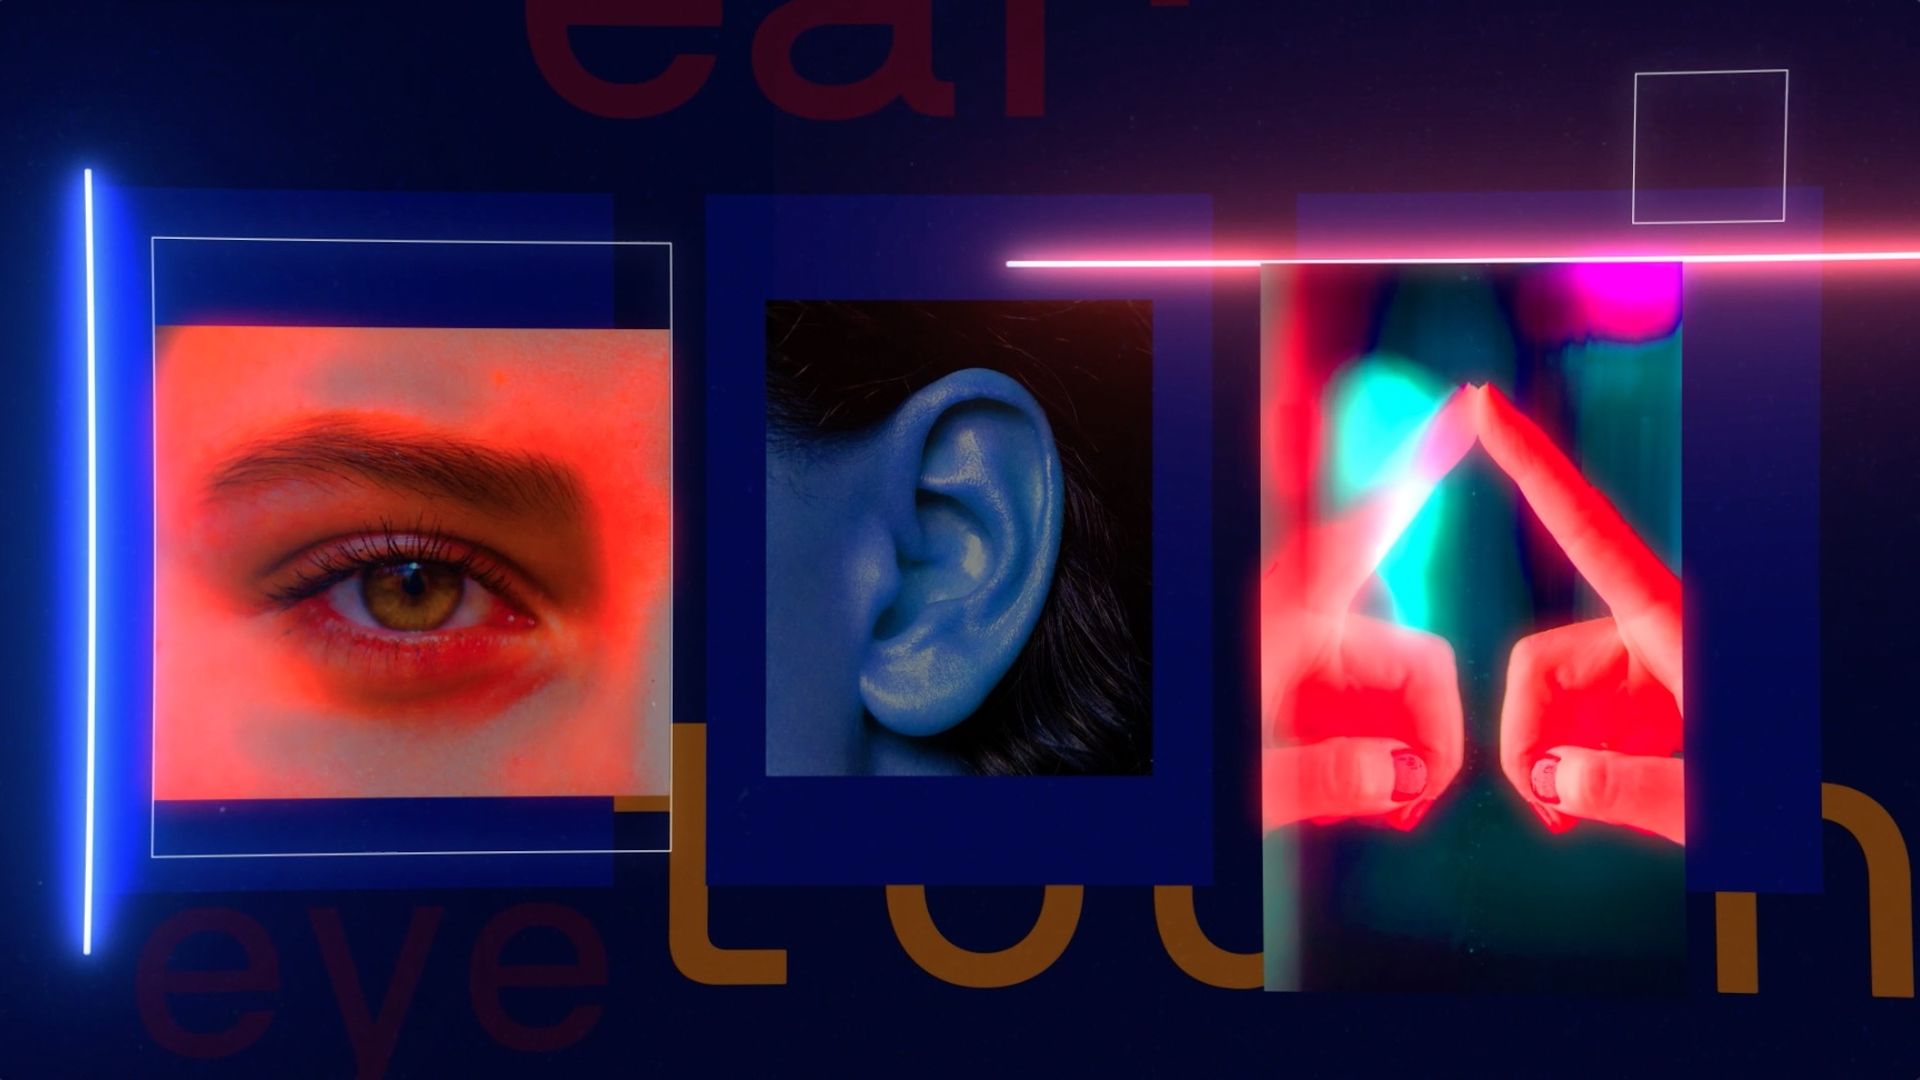 A high-tech image of an eye, an ear and fingers touching each other to represent the metaverse